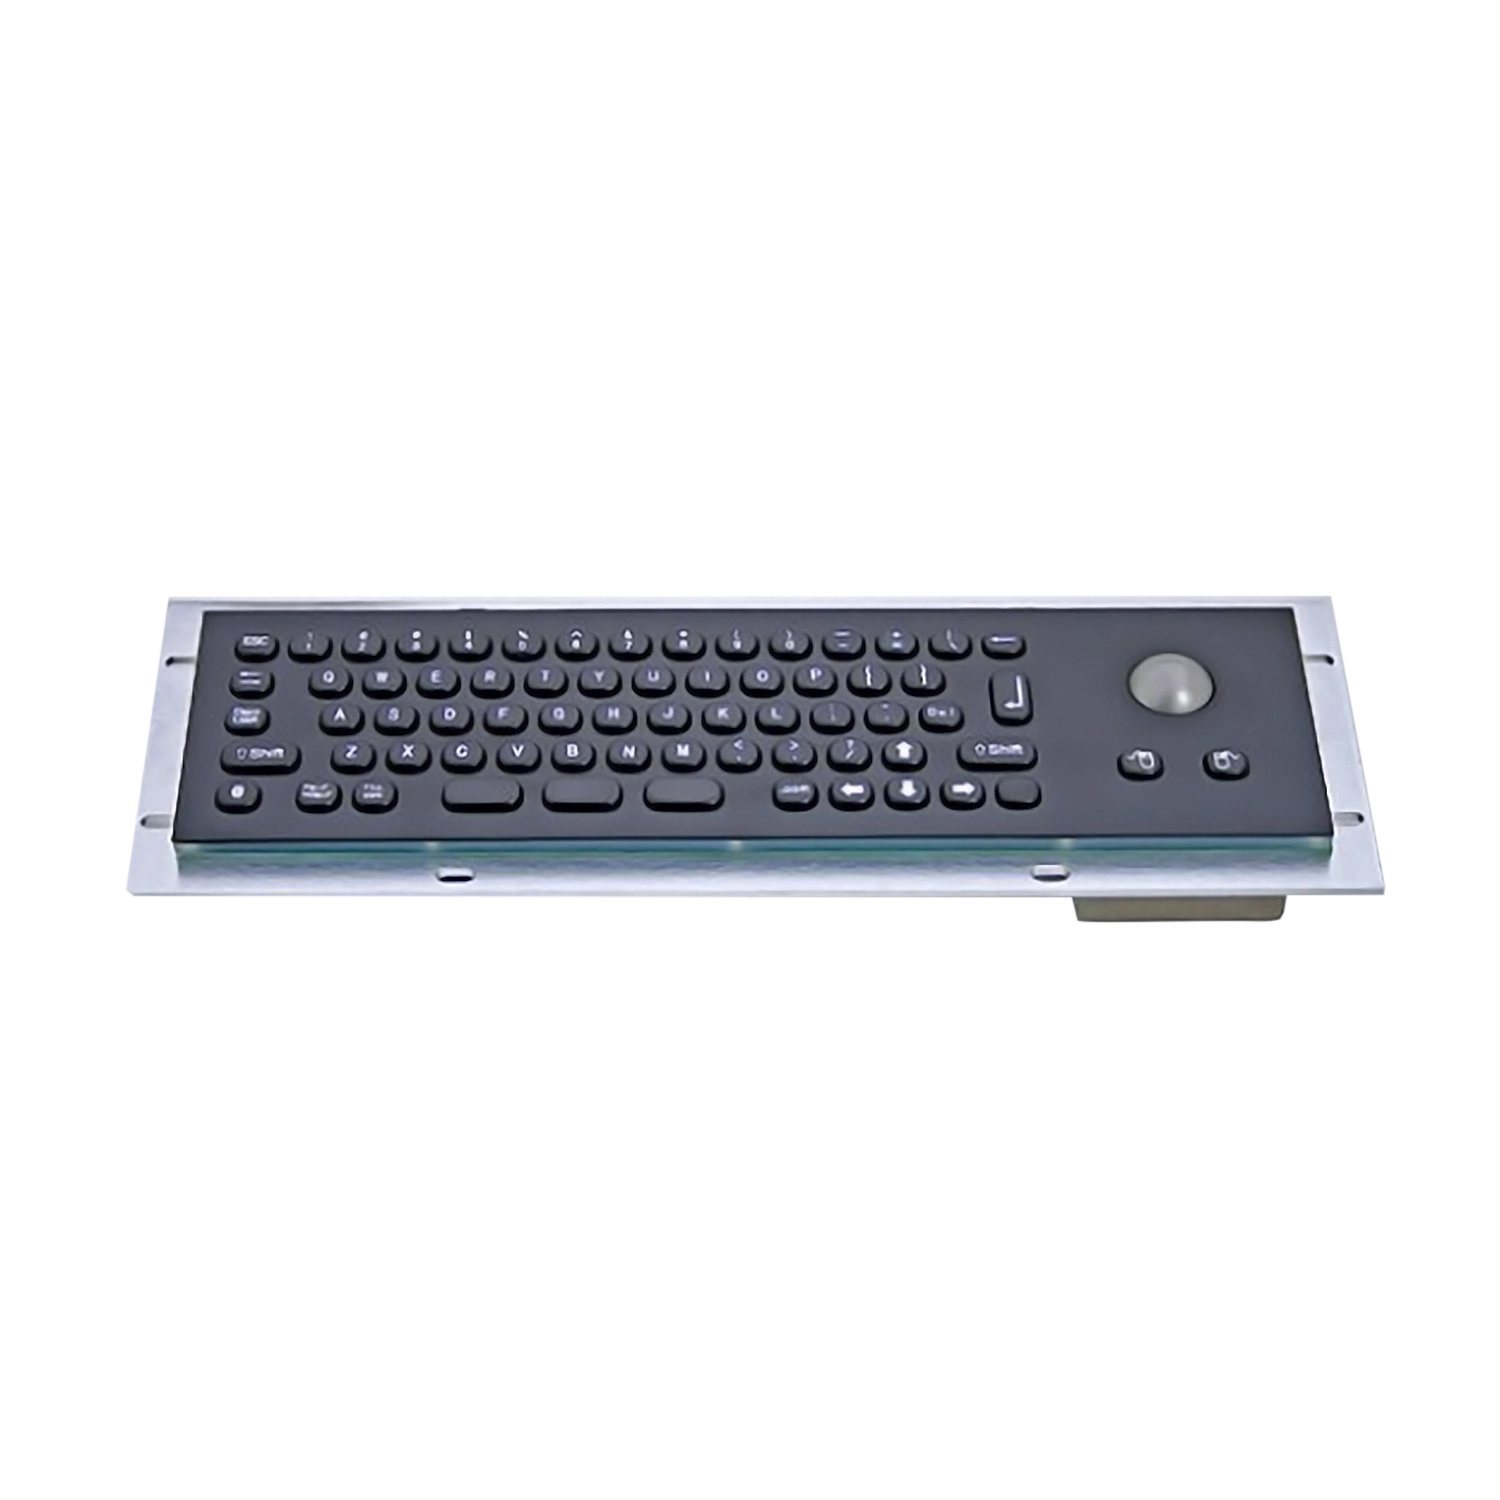 Rugged panel mount keyboard with trackball KB-000-NW0S0T10 MINI